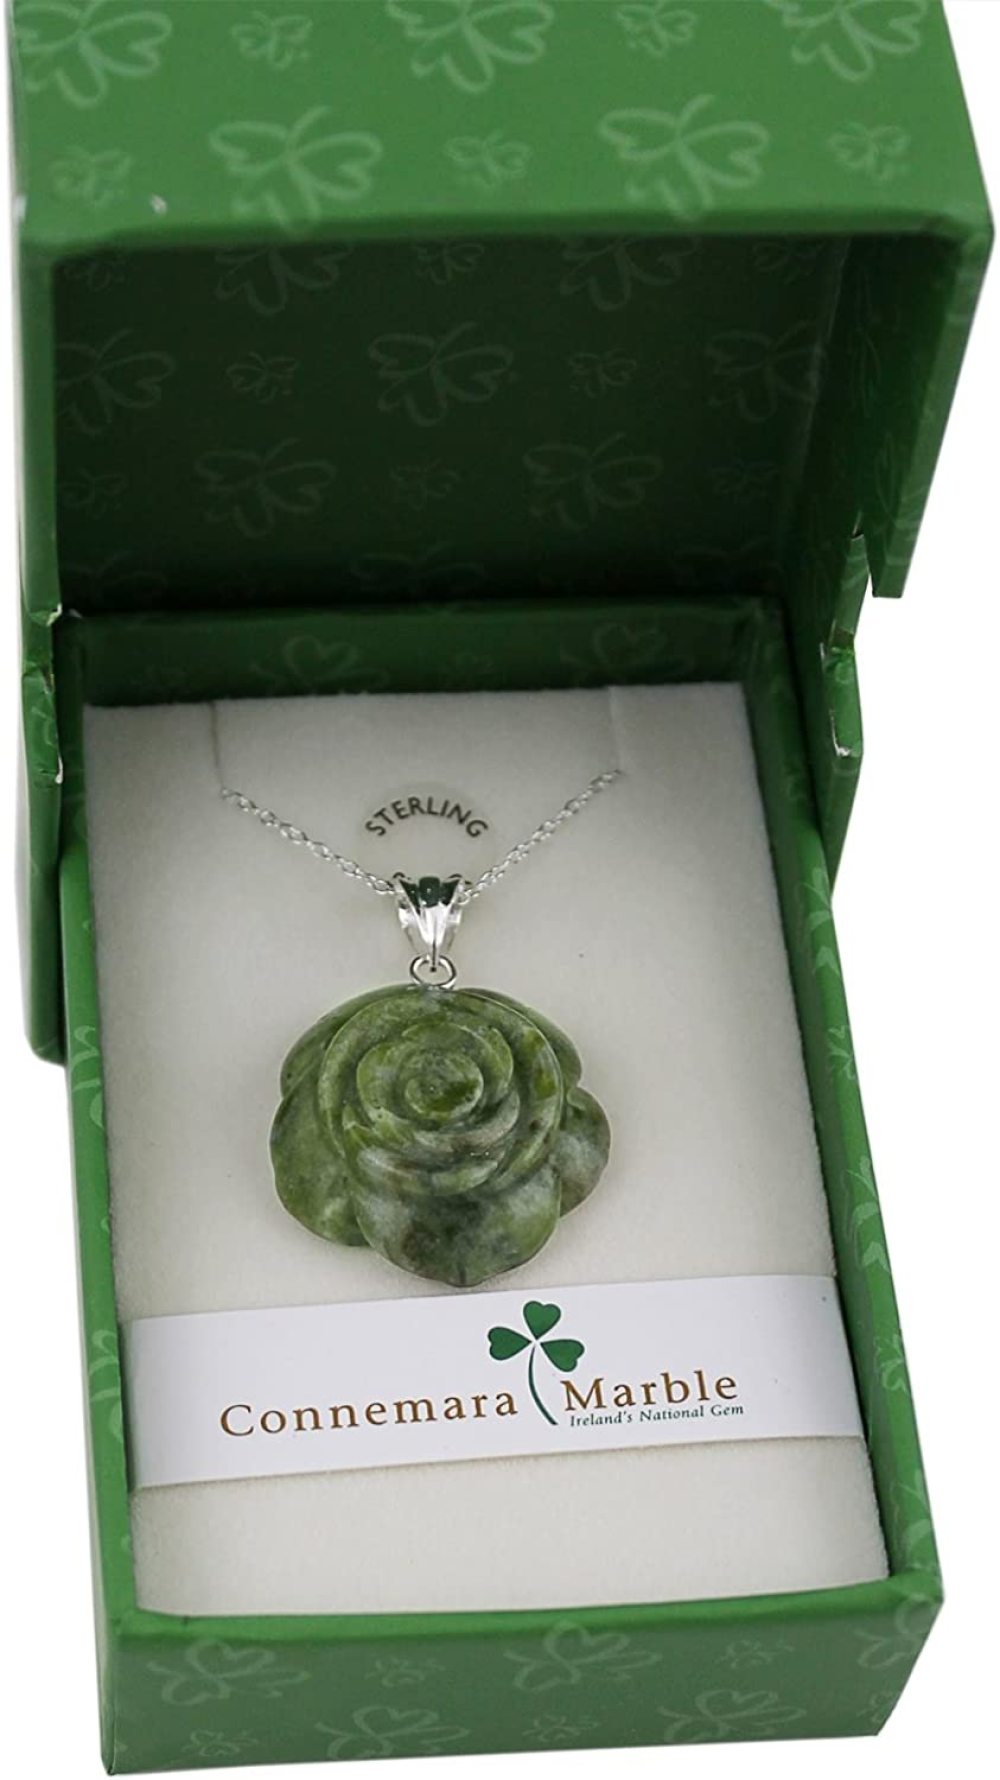 Sterling Silver & Irish Connemara Marble Carved Rose Pendant - image 2 of 3